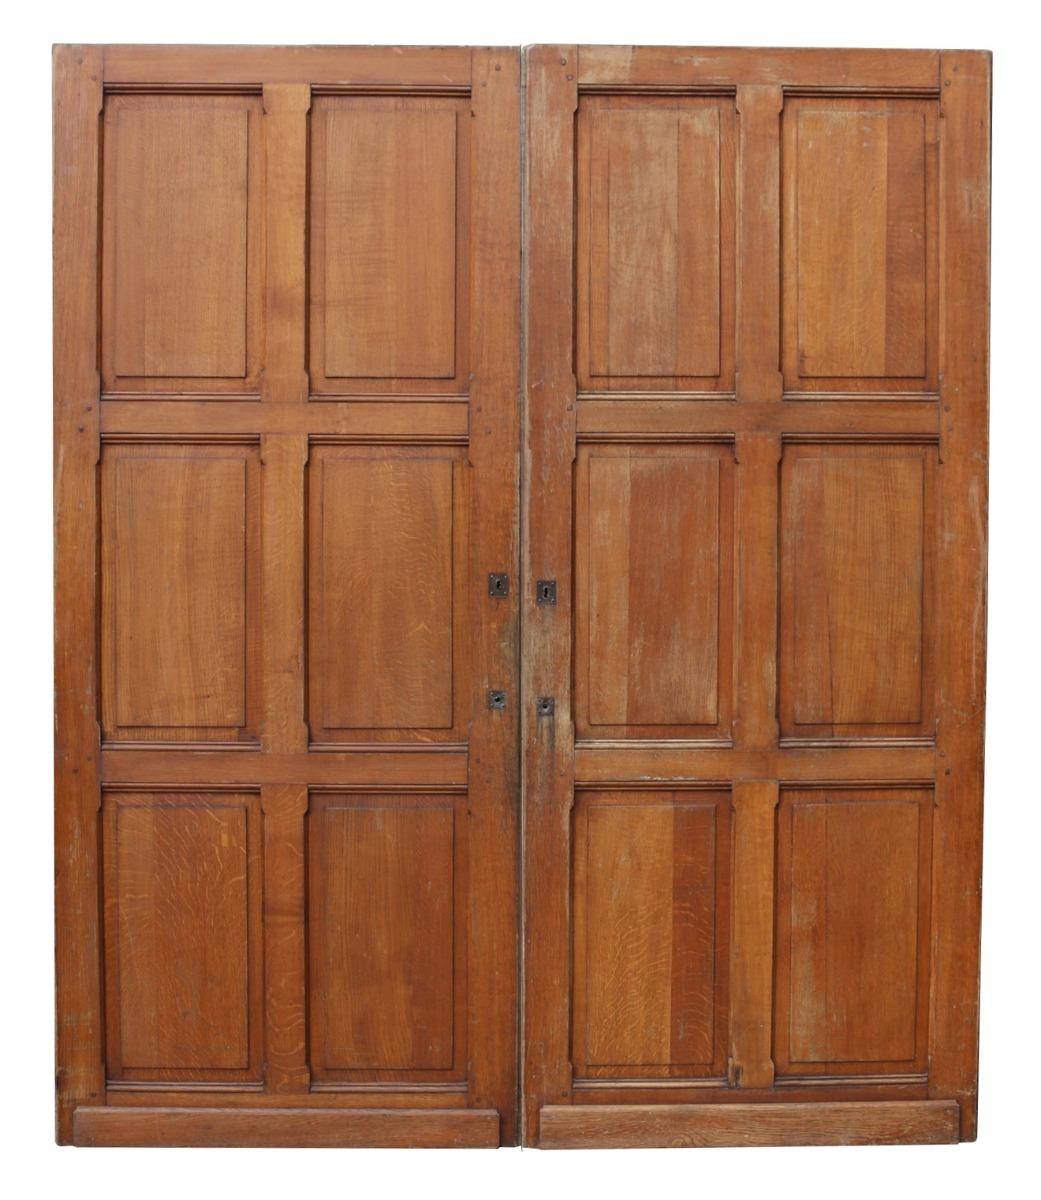 A good quality pair of doors with raised and fielded panels. These could either be hinged traditionally or adapted for use as sliding doors.